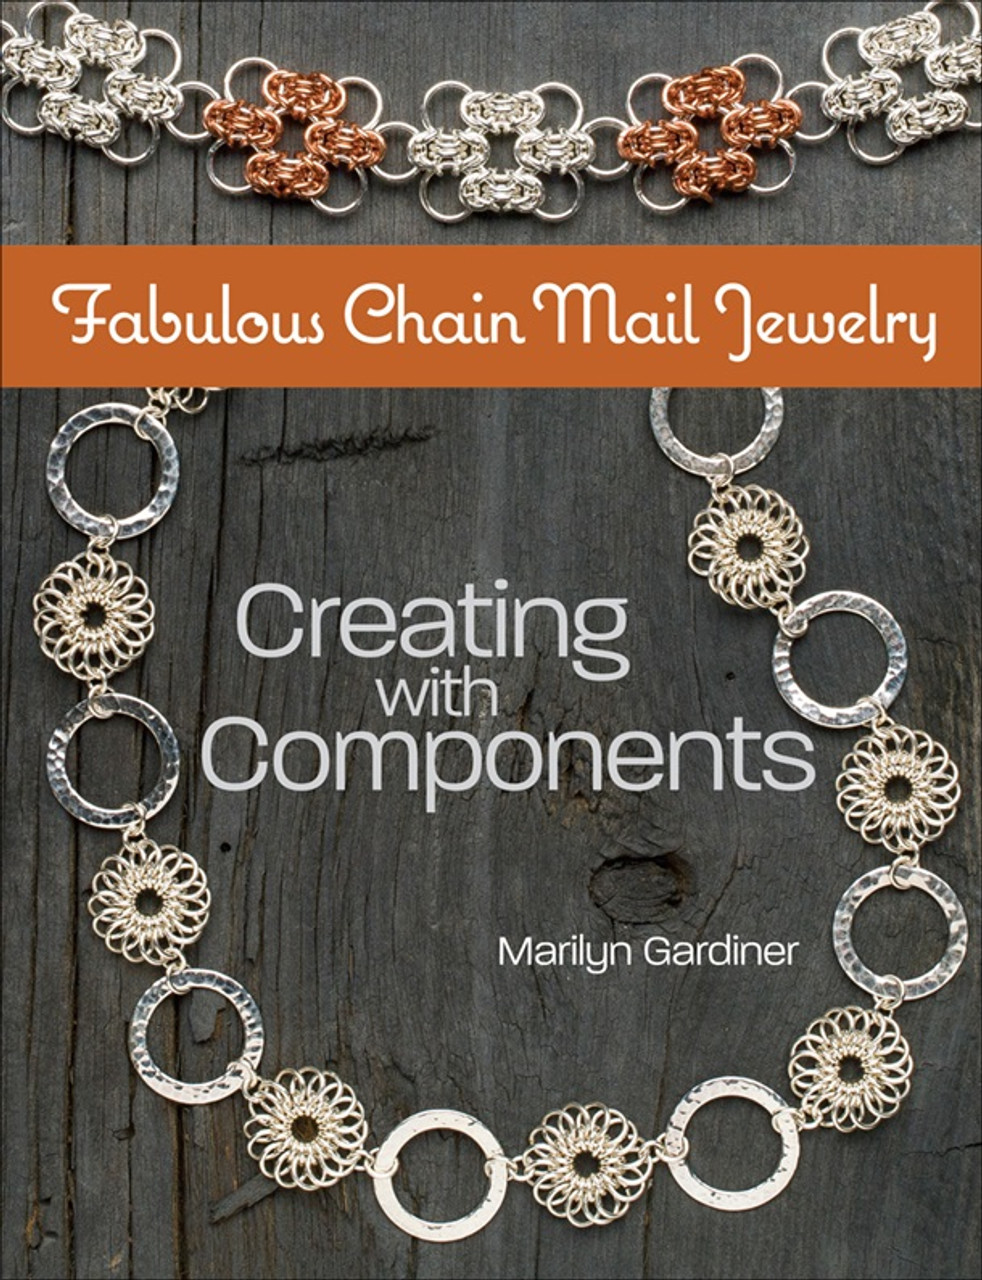 Fabulous Chain Mail Jewelry: Creating with Components [Book]